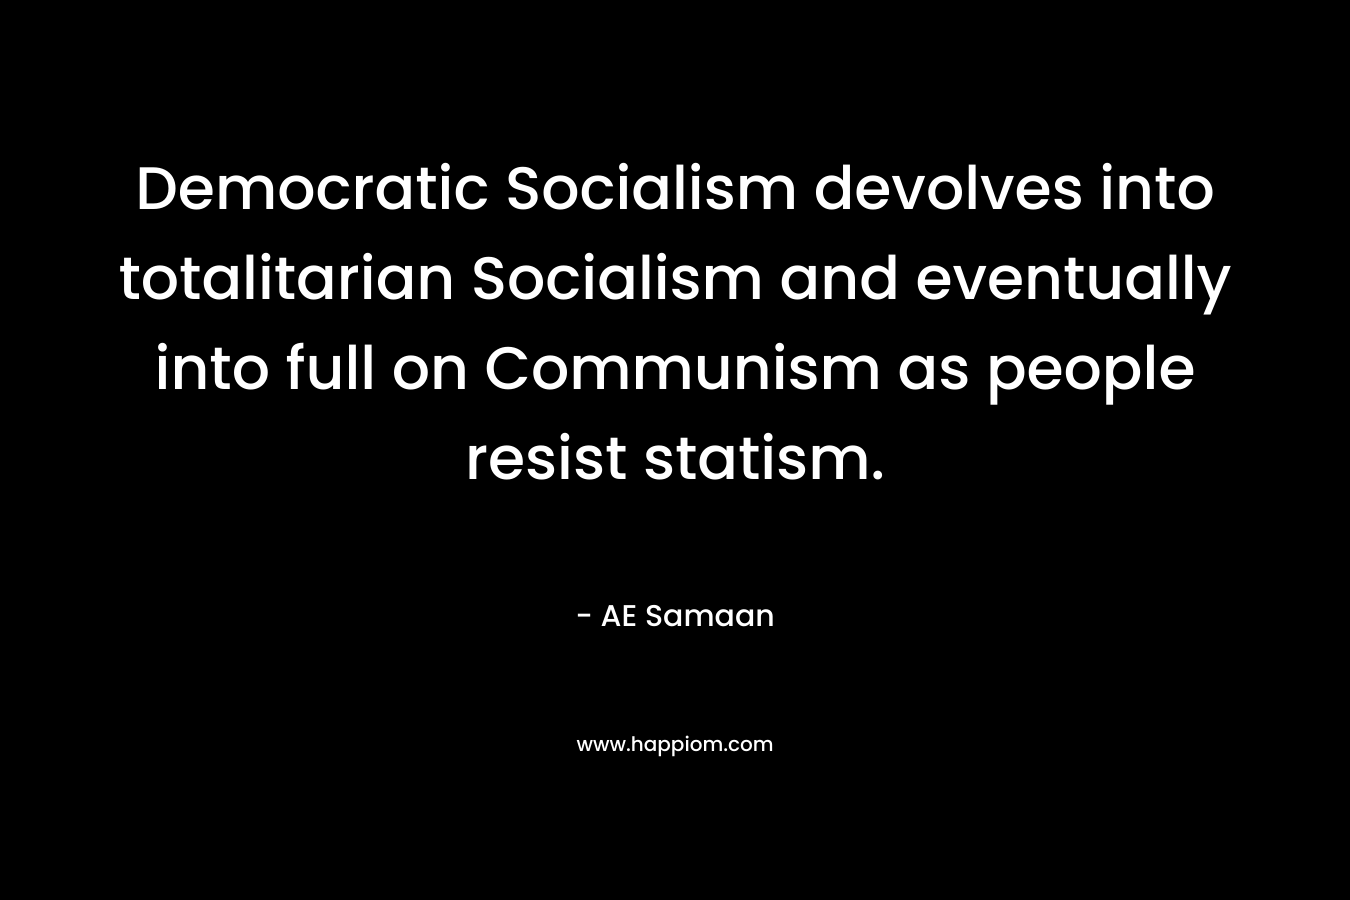 Democratic Socialism devolves into totalitarian Socialism and eventually into full on Communism as people resist statism.